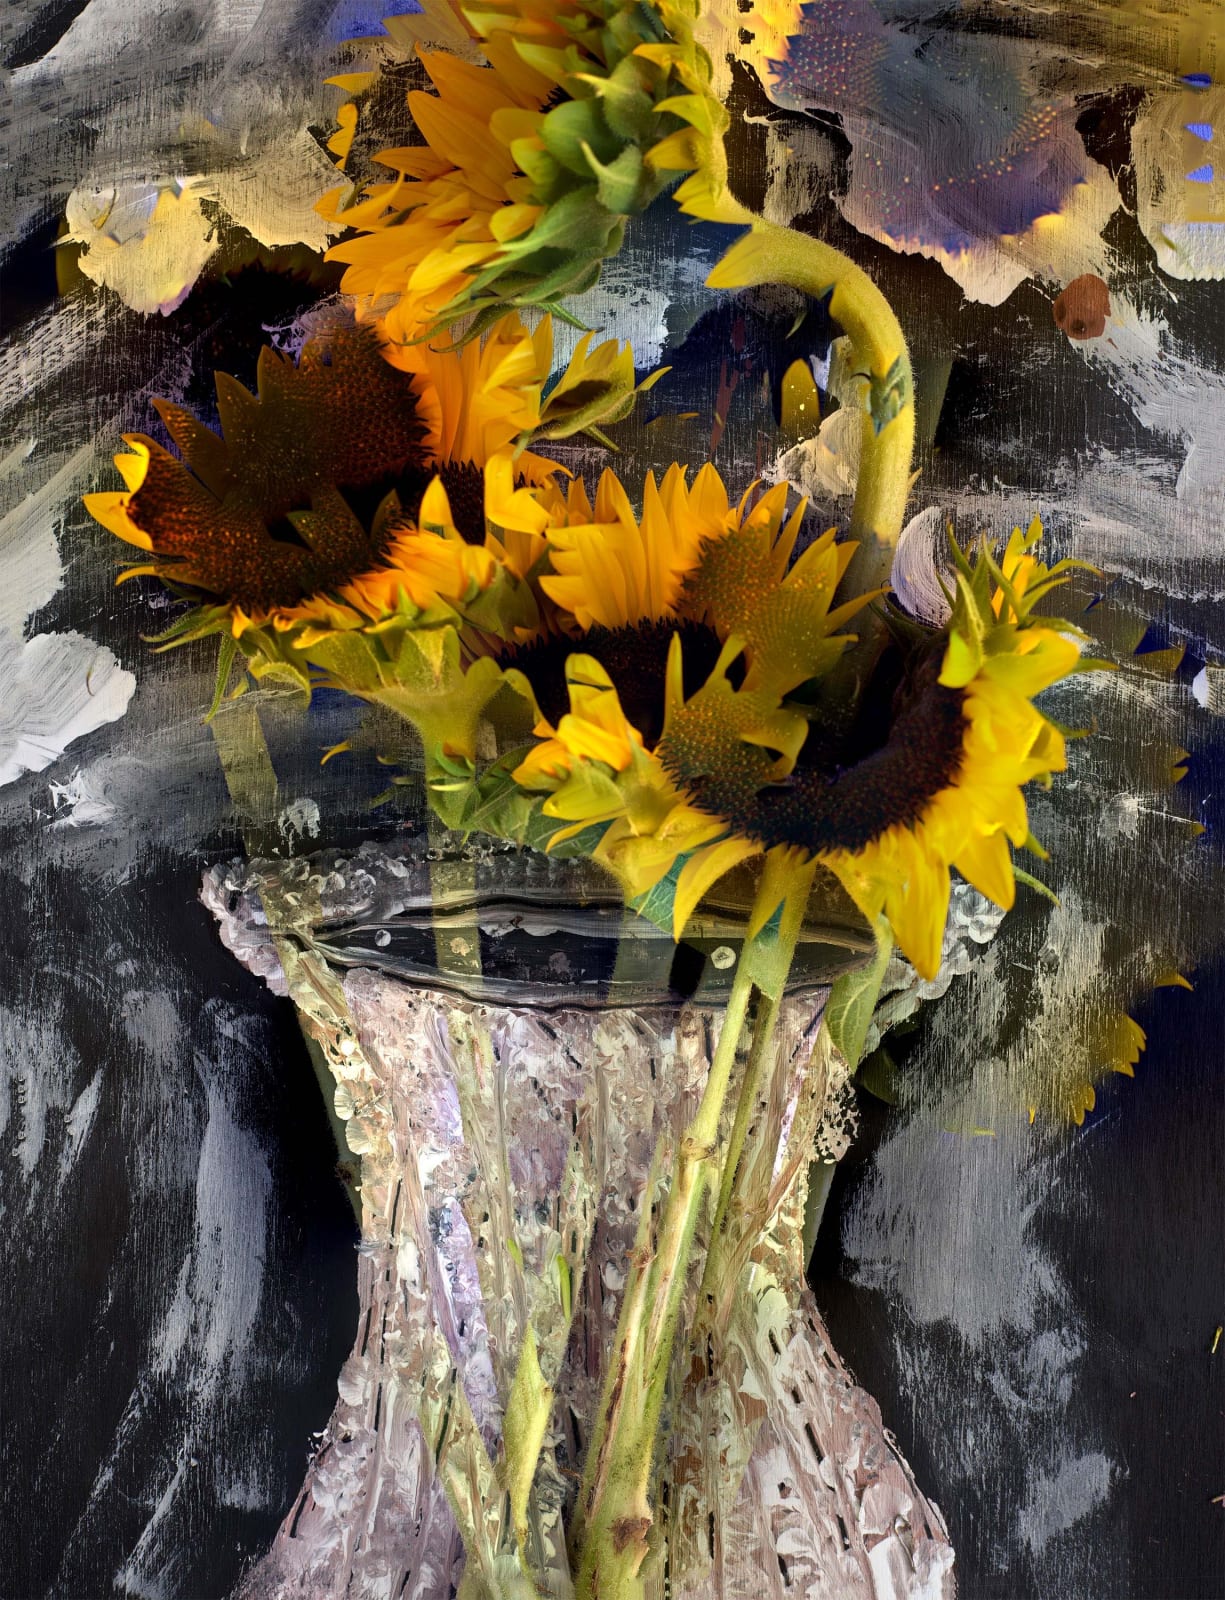 Abelardo Morell Flowers for Lisa #23 Four Sunflowers vase of sunflowers against dark painting multiple exposure photograph combining flowers and painting